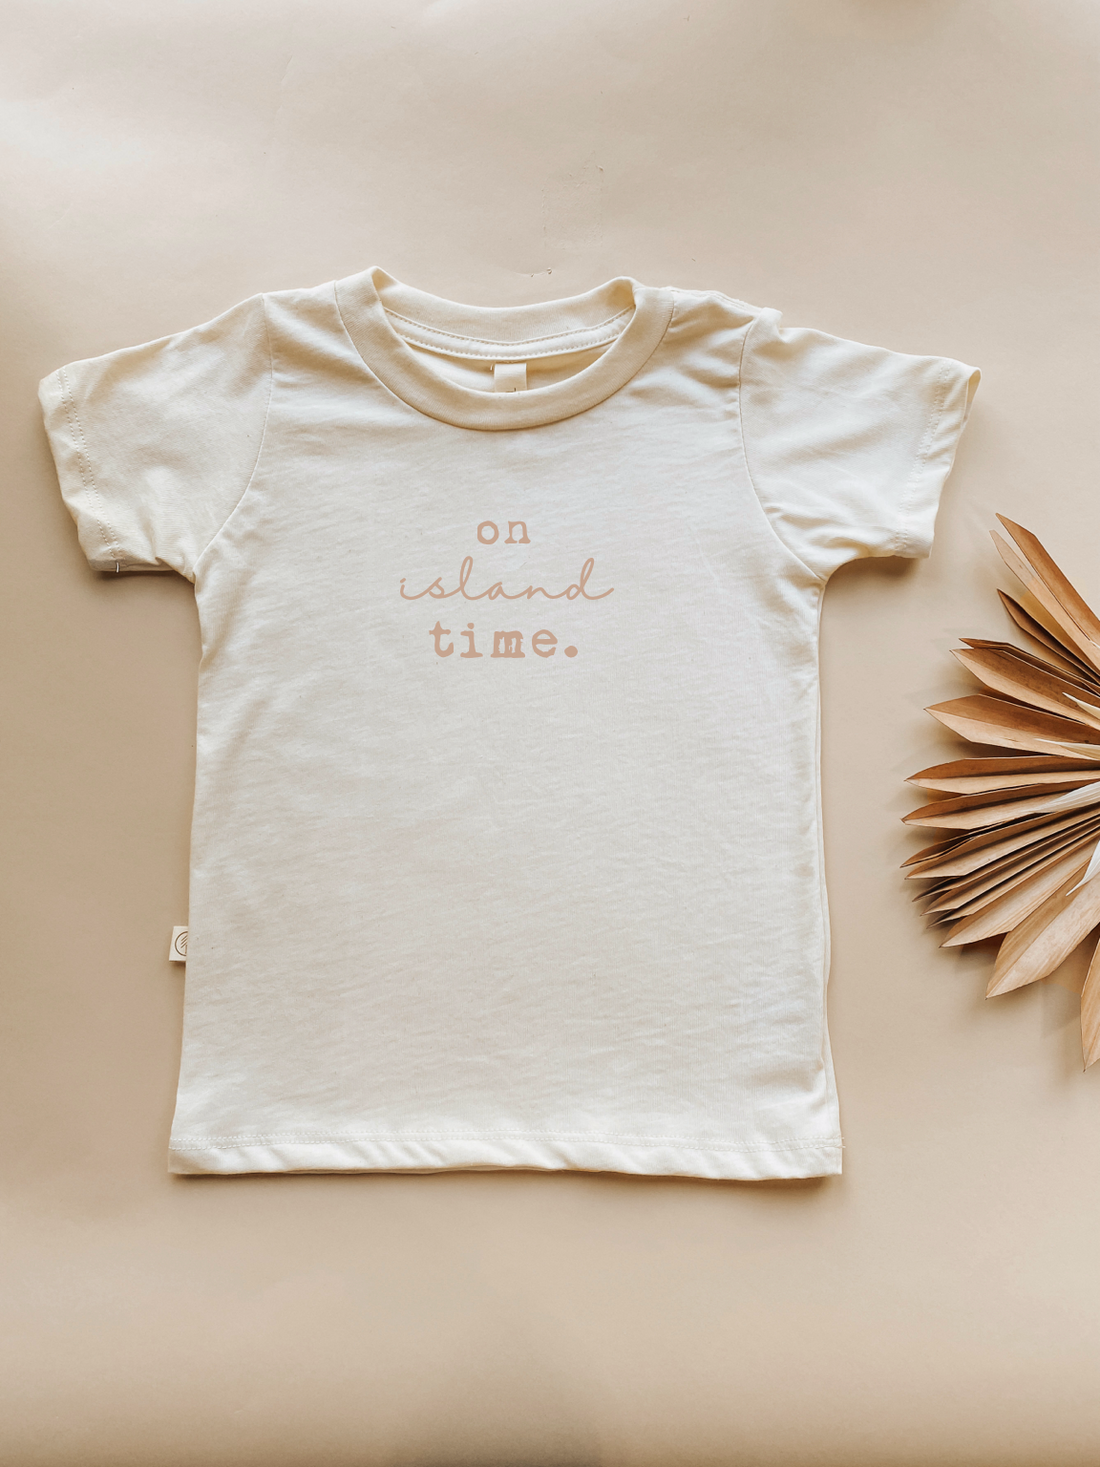 Toddler Crew Neck Tee | On Island Time in Almond | Organic Cotton